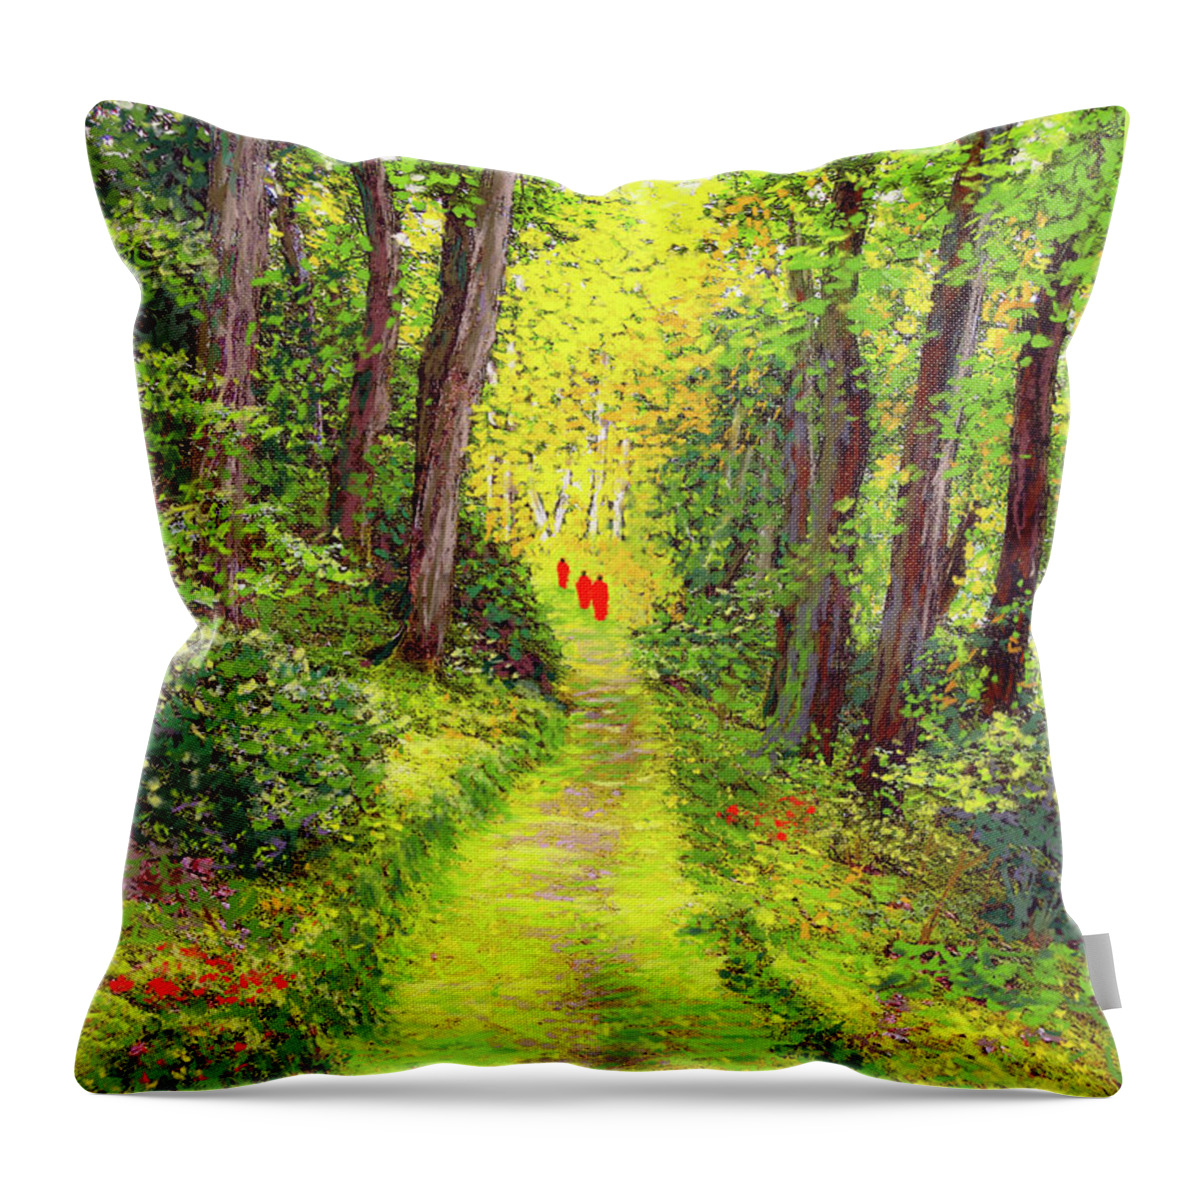 Meditation Throw Pillow featuring the painting Walking Meditation by Jane Small